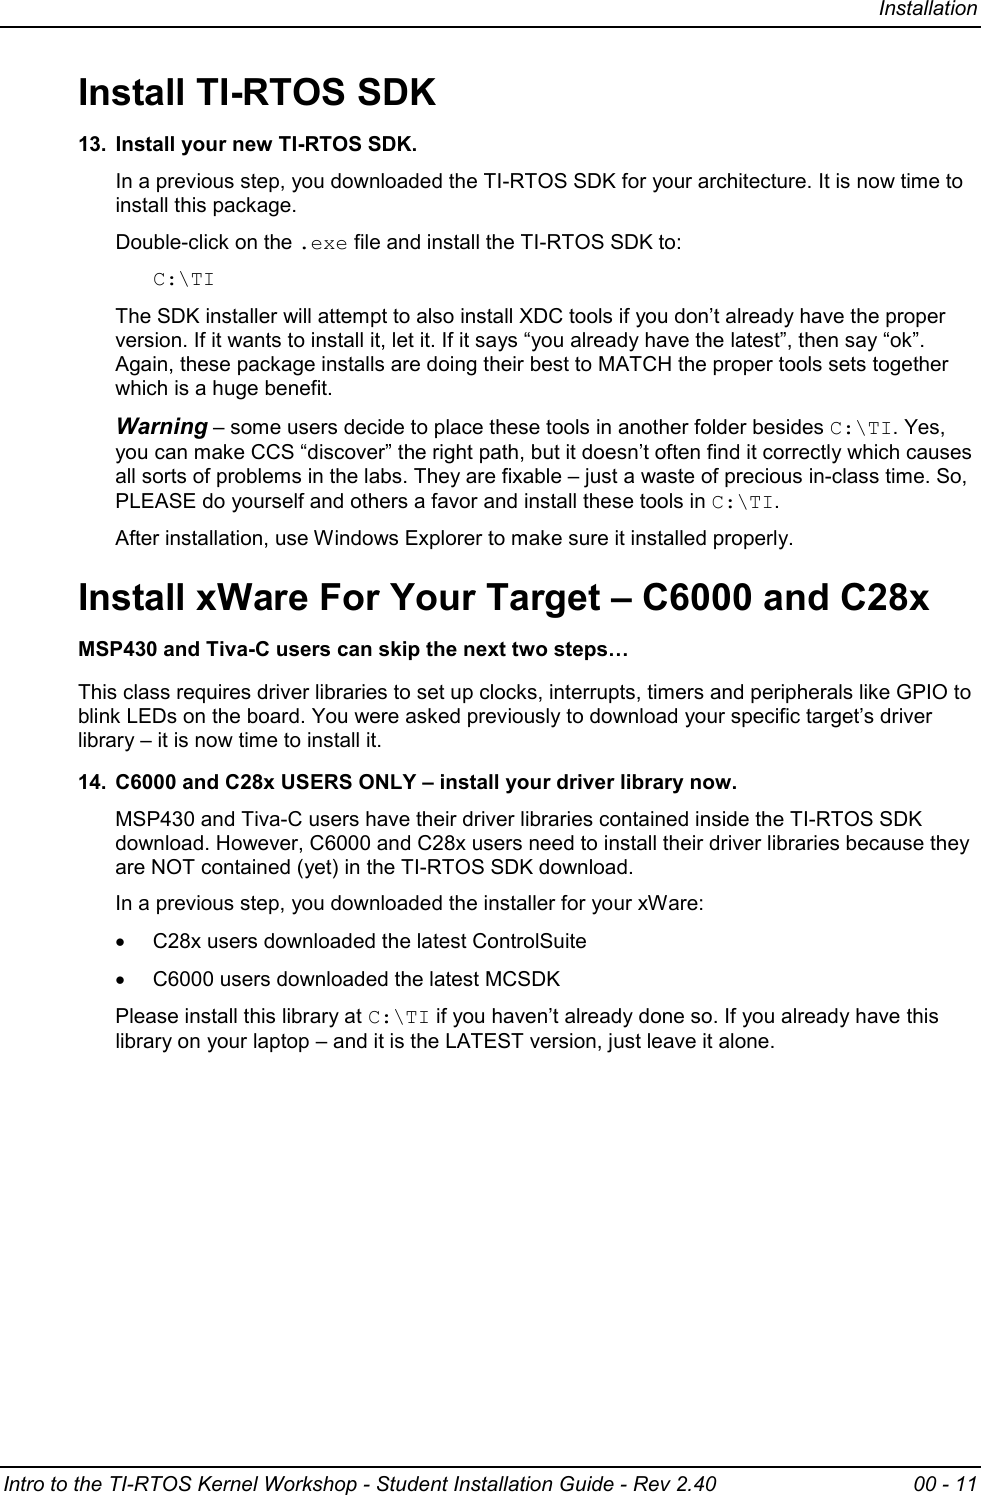 Page 11 of 12 - Student Installation Guide - Rev 2.40 TI RTOS Workshop Rev2.40